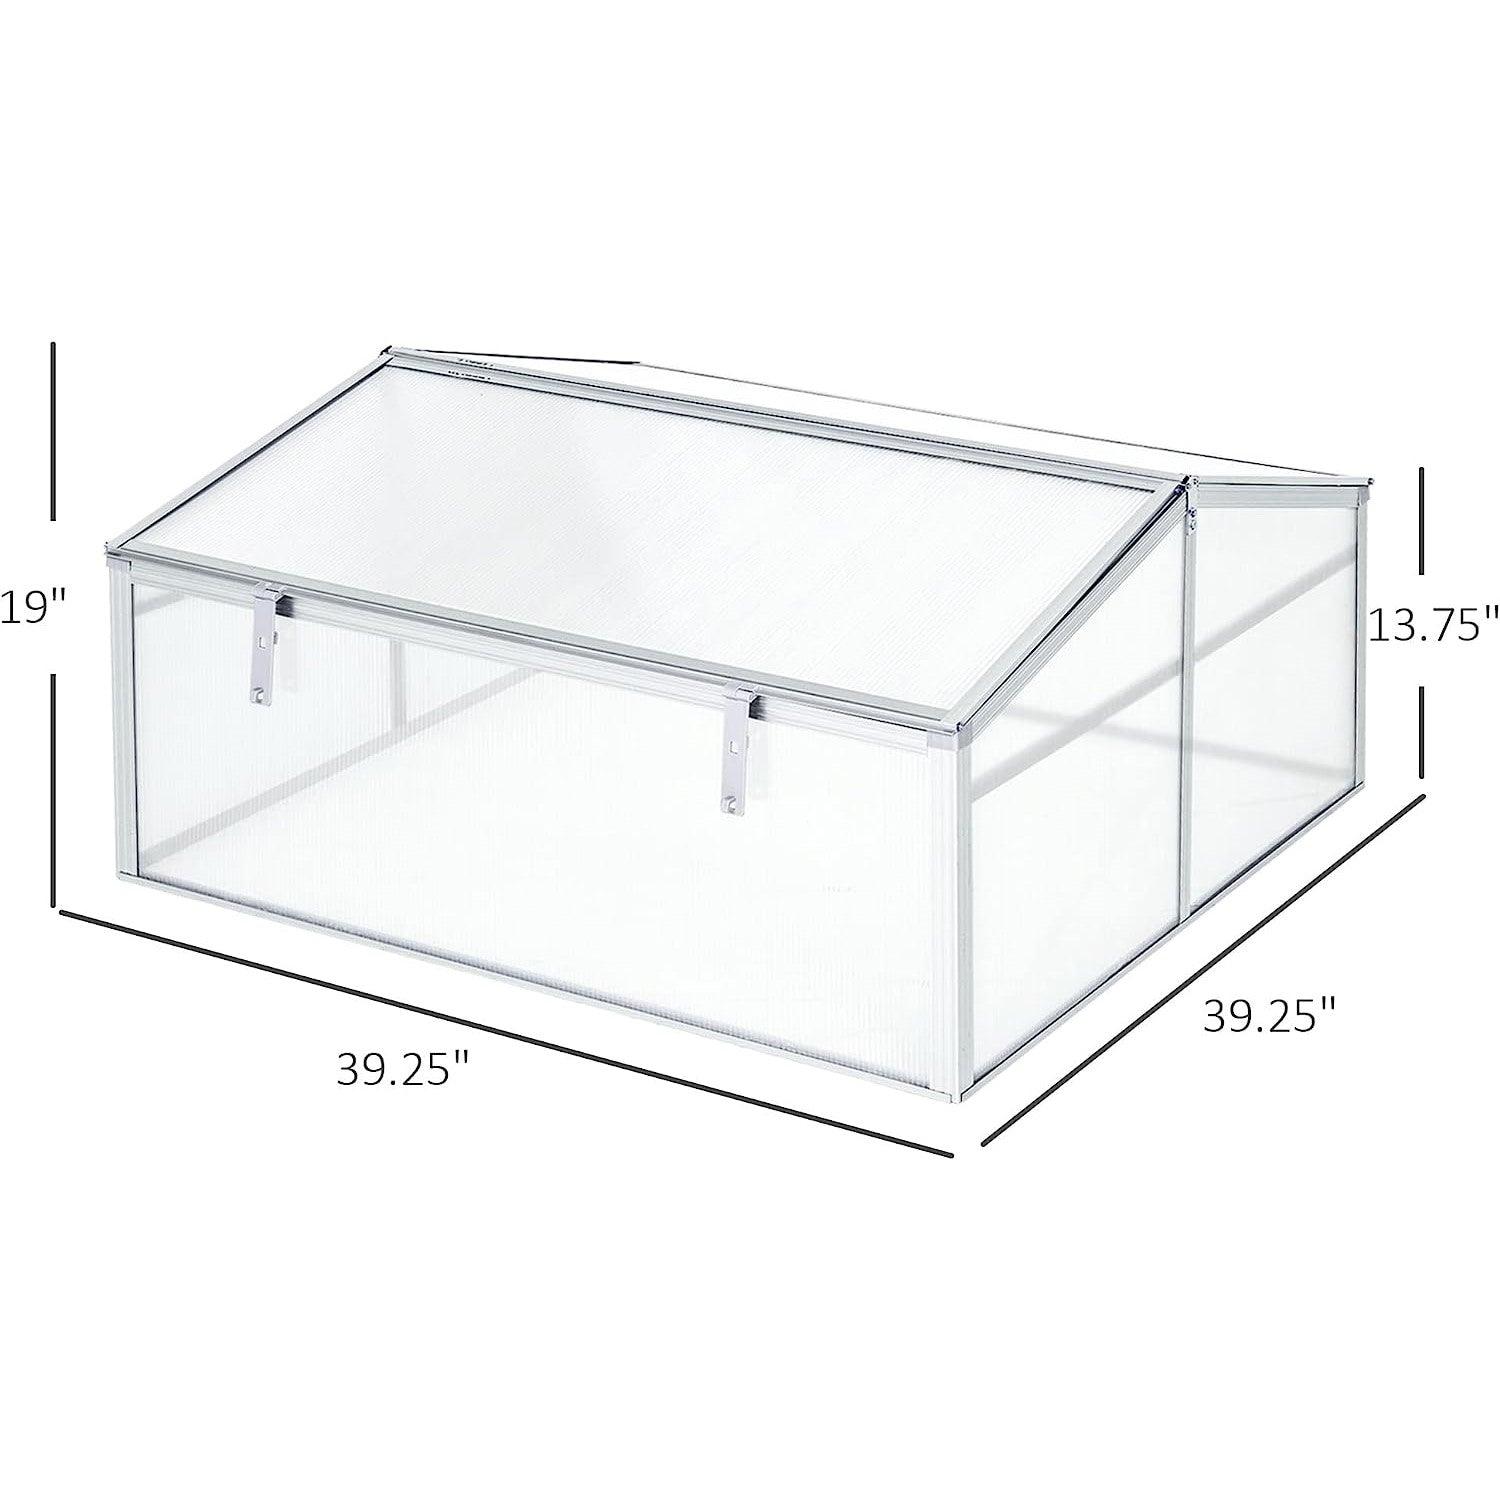 39 Inch Vented Cold Frame Mini Greenhouse Kit with Adjustable Roof